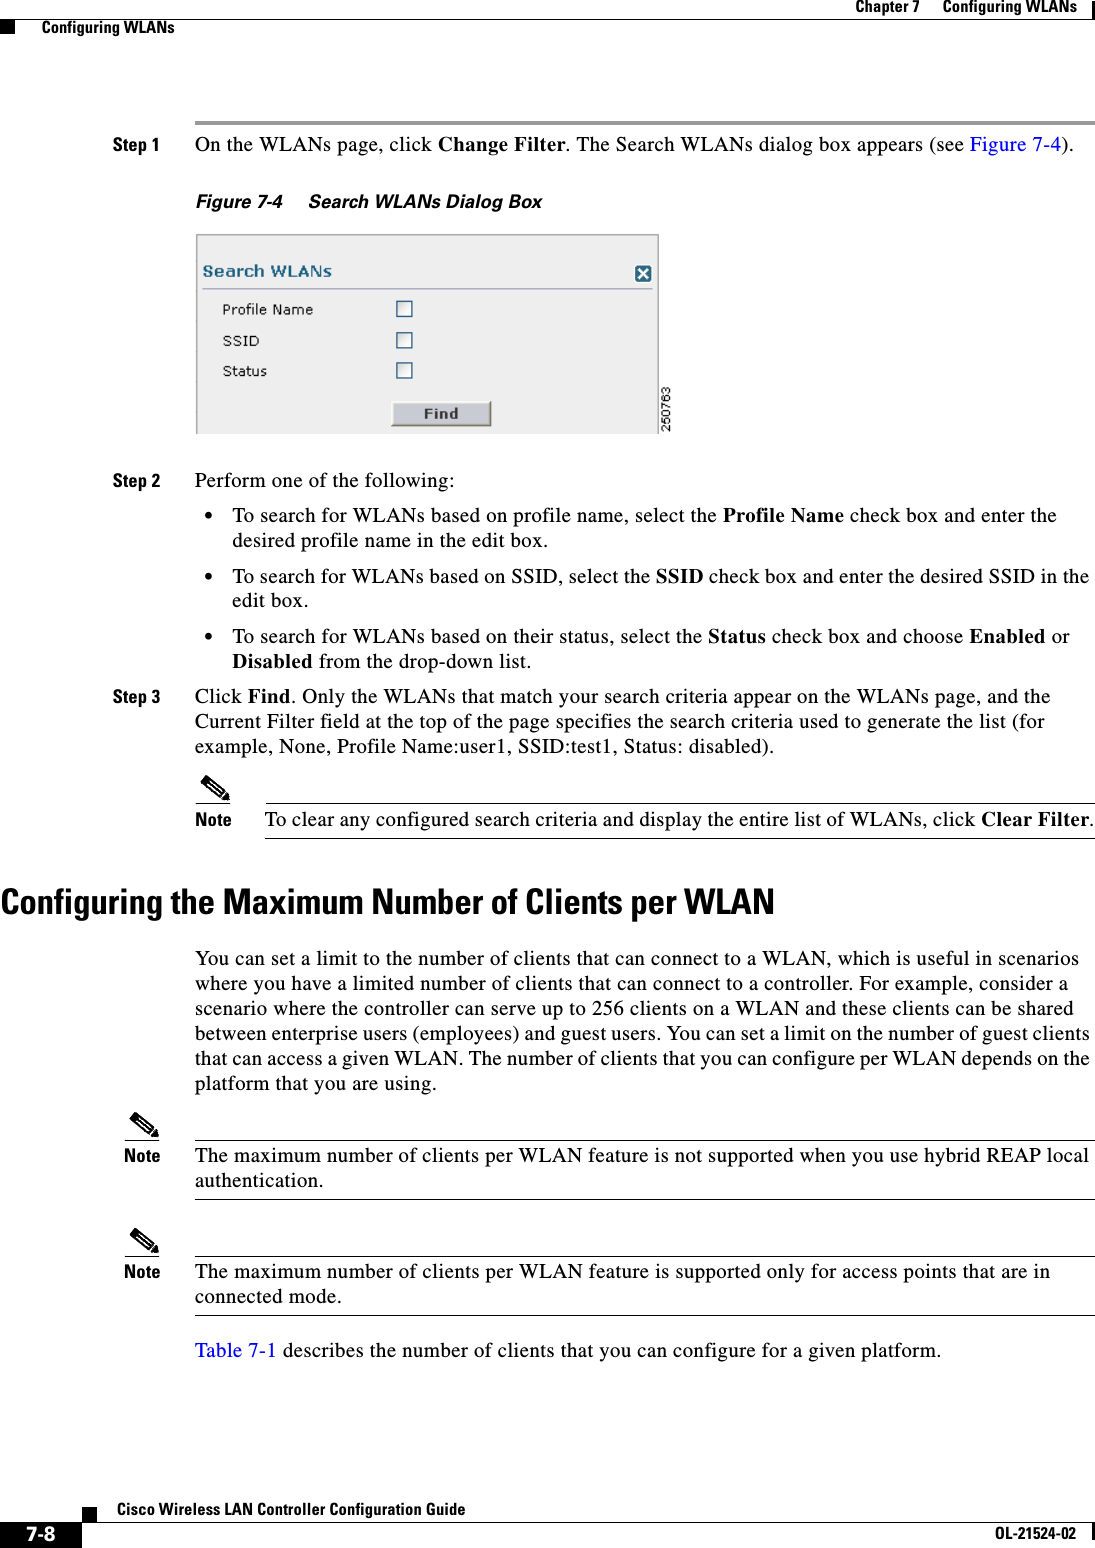  7-8Cisco Wireless LAN Controller Configuration GuideOL-21524-02Chapter 7      Configuring WLANs  Configuring WLANsStep 1 On the WLANs page, click Change Filter. The Search WLANs dialog box appears (see Figure 7-4).Figure 7-4 Search WLANs Dialog BoxStep 2 Perform one of the following:  • To search for WLANs based on profile name, select the Profile Name check box and enter the desired profile name in the edit box.  • To search for WLANs based on SSID, select the SSID check box and enter the desired SSID in the edit box.  • To search for WLANs based on their status, select the Status check box and choose Enabled or Disabled from the drop-down list.Step 3 Click Find. Only the WLANs that match your search criteria appear on the WLANs page, and the Current Filter field at the top of the page specifies the search criteria used to generate the list (for example, None, Profile Name:user1, SSID:test1, Status: disabled).Note To clear any configured search criteria and display the entire list of WLANs, click Clear Filter.Configuring the Maximum Number of Clients per WLANYou can set a limit to the number of clients that can connect to a WLAN, which is useful in scenarios where you have a limited number of clients that can connect to a controller. For example, consider a scenario where the controller can serve up to 256 clients on a WLAN and these clients can be shared between enterprise users (employees) and guest users. You can set a limit on the number of guest clients that can access a given WLAN. The number of clients that you can configure per WLAN depends on the platform that you are using. Note The maximum number of clients per WLAN feature is not supported when you use hybrid REAP local authentication.Note The maximum number of clients per WLAN feature is supported only for access points that are in connected mode.Table 7-1 describes the number of clients that you can configure for a given platform.